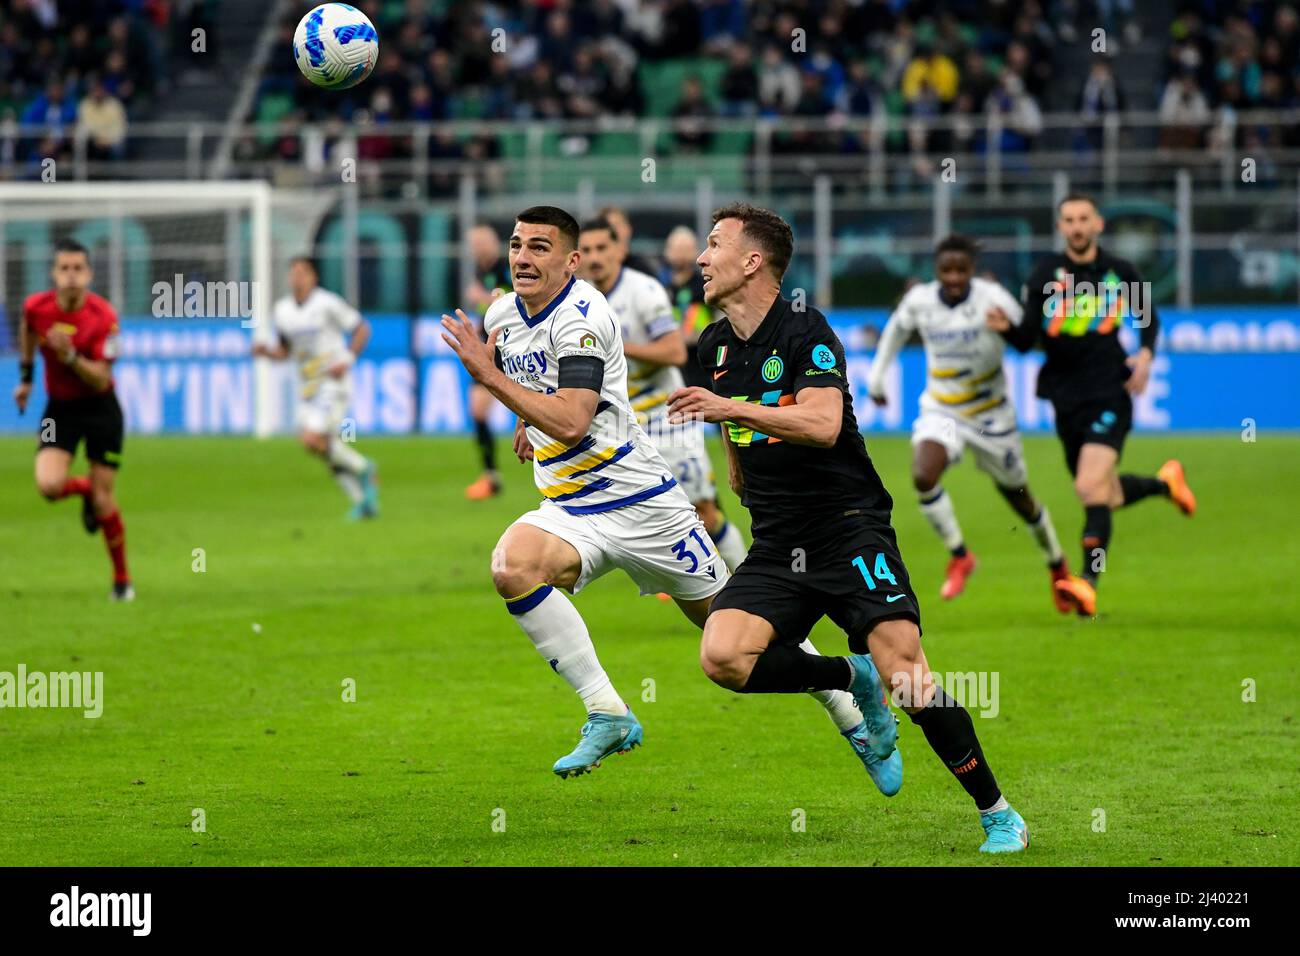 Milano, Italy. 09th, April 2022. Ivan Perisic (14) of Inter and Bosko Sutalo (31) of Verona seen in the Serie A match between Inter and Hellas Verona at Giuseppe Meazza in Milano. (Photo credit: Gonzales Photo - Tommaso Fimiano). Stock Photo